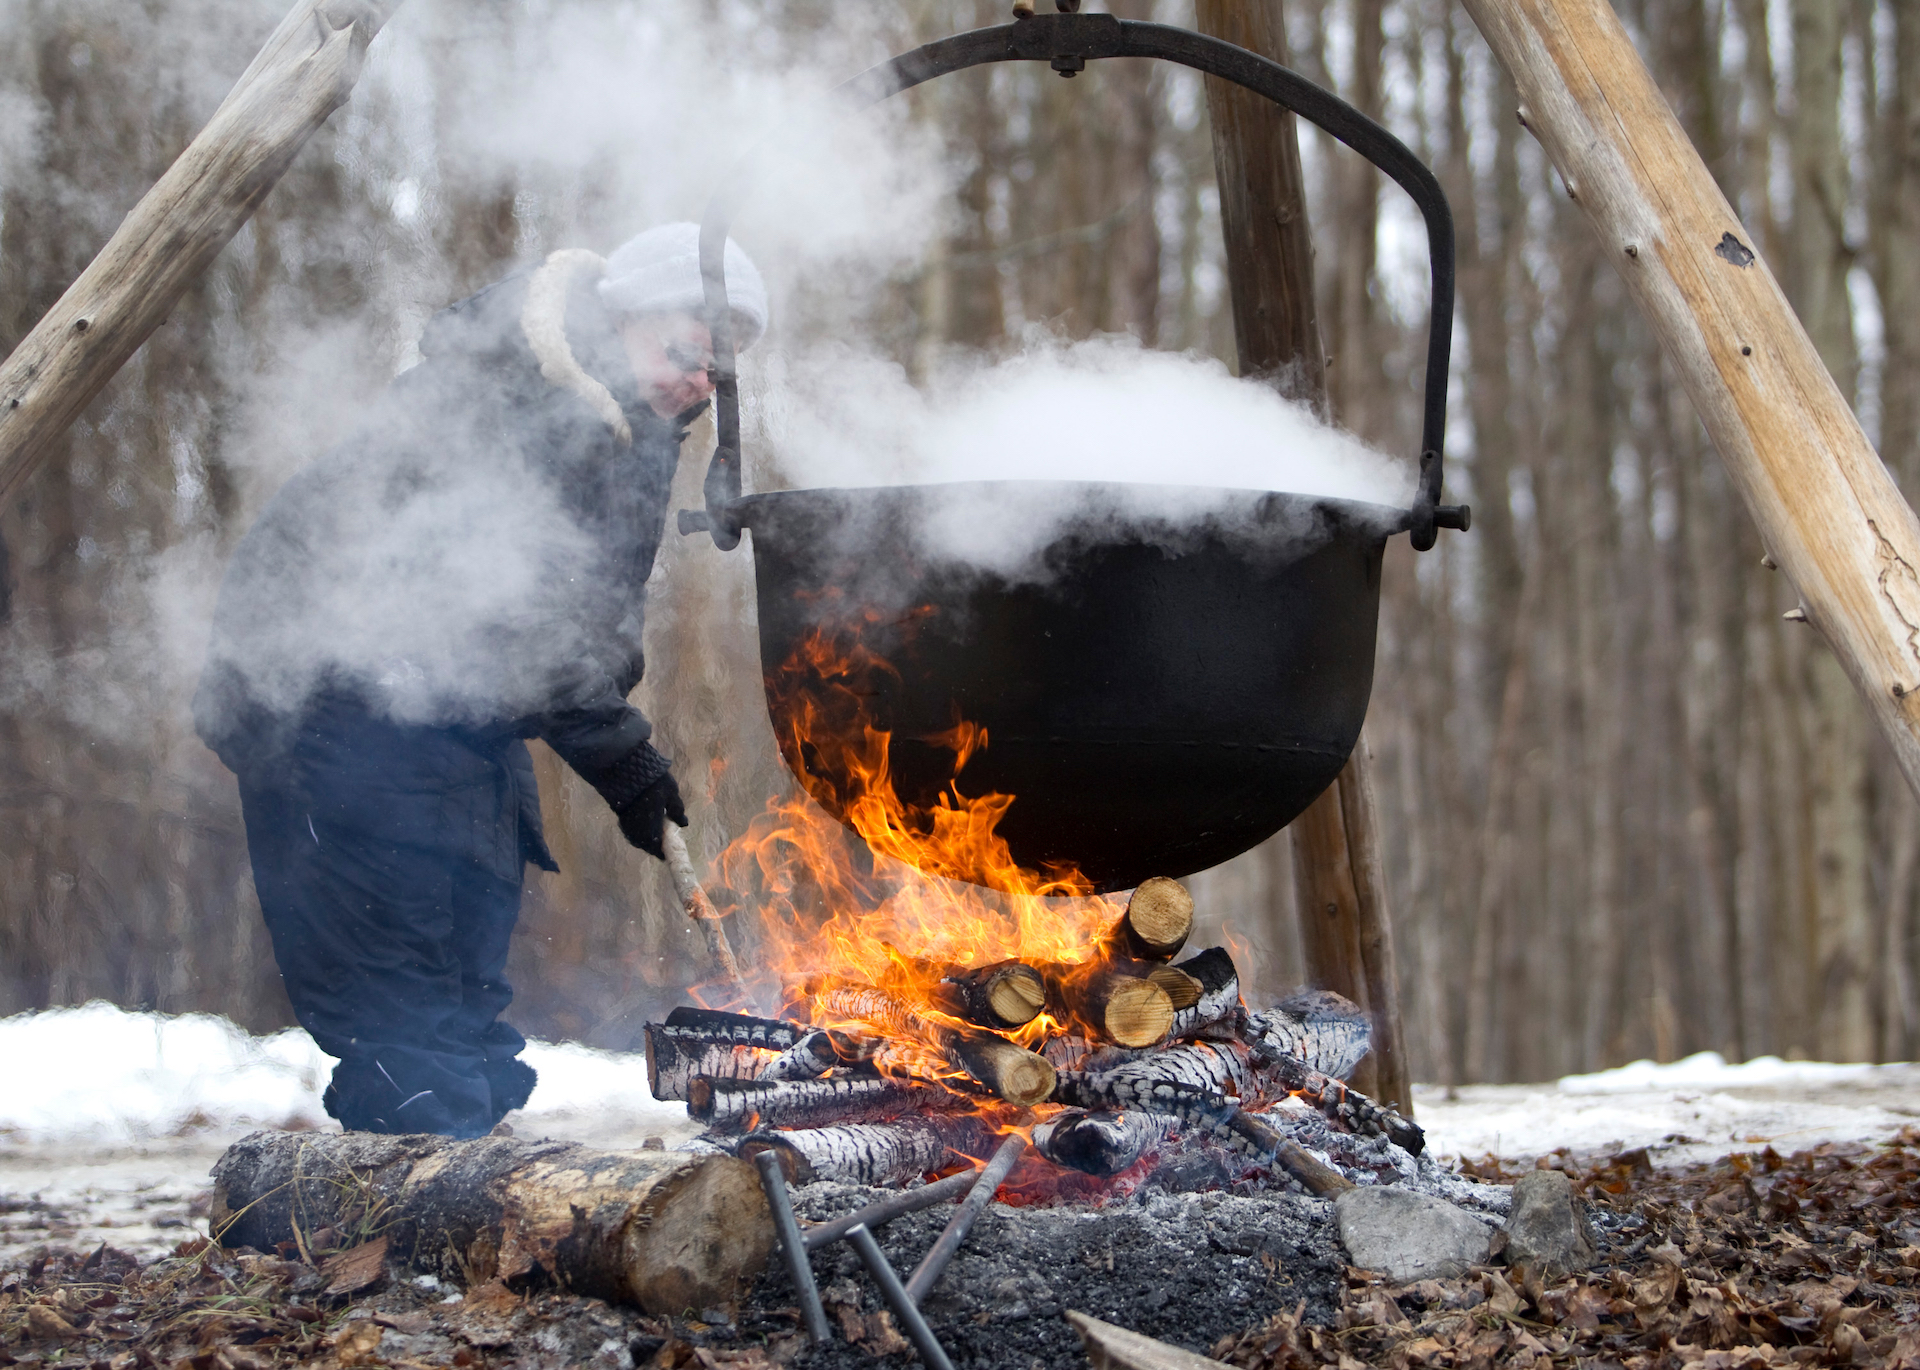 A person boils maple syrup over a fire